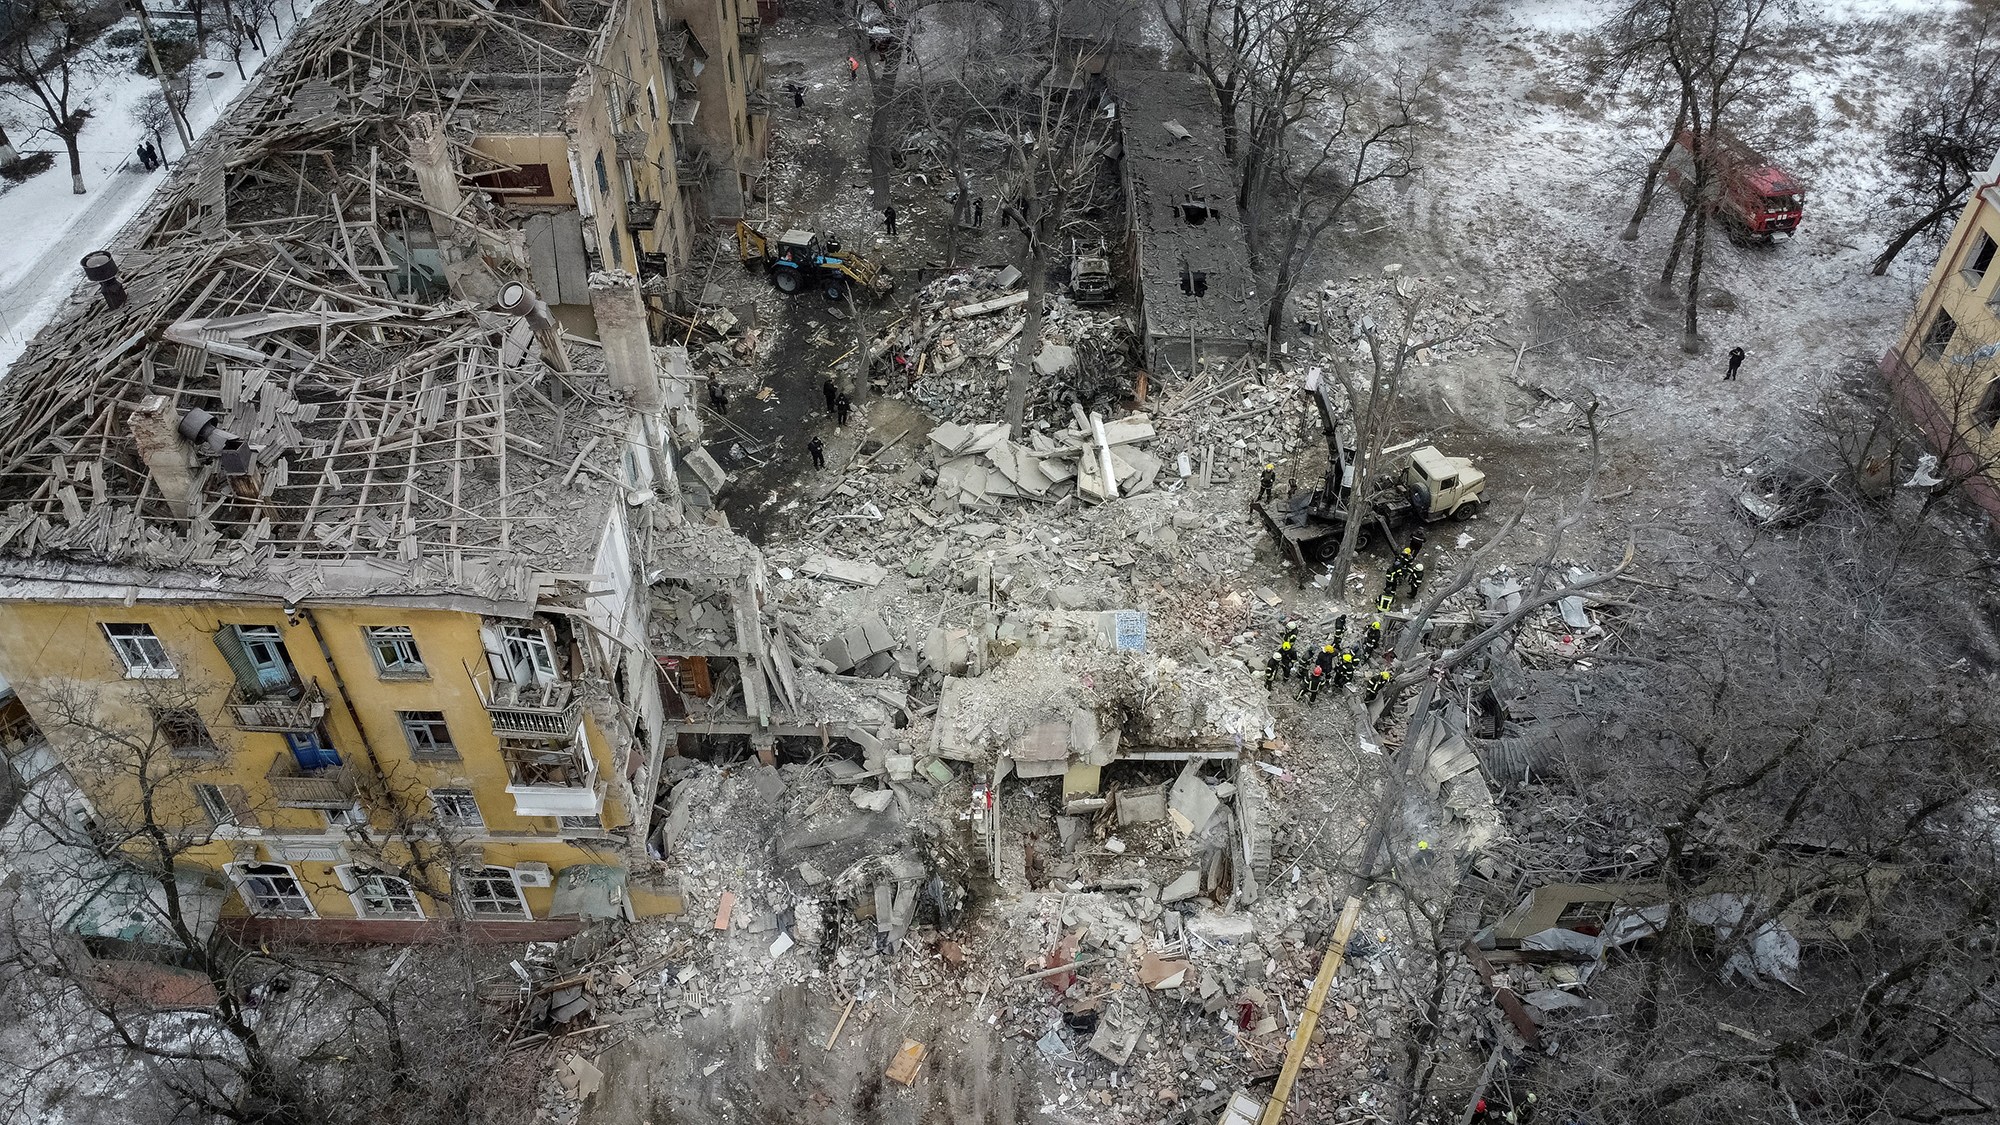 Rescuers work at the site of a residential building destroyed by a Russian missile strike, in Kramatorsk, Ukraine, on February 2.